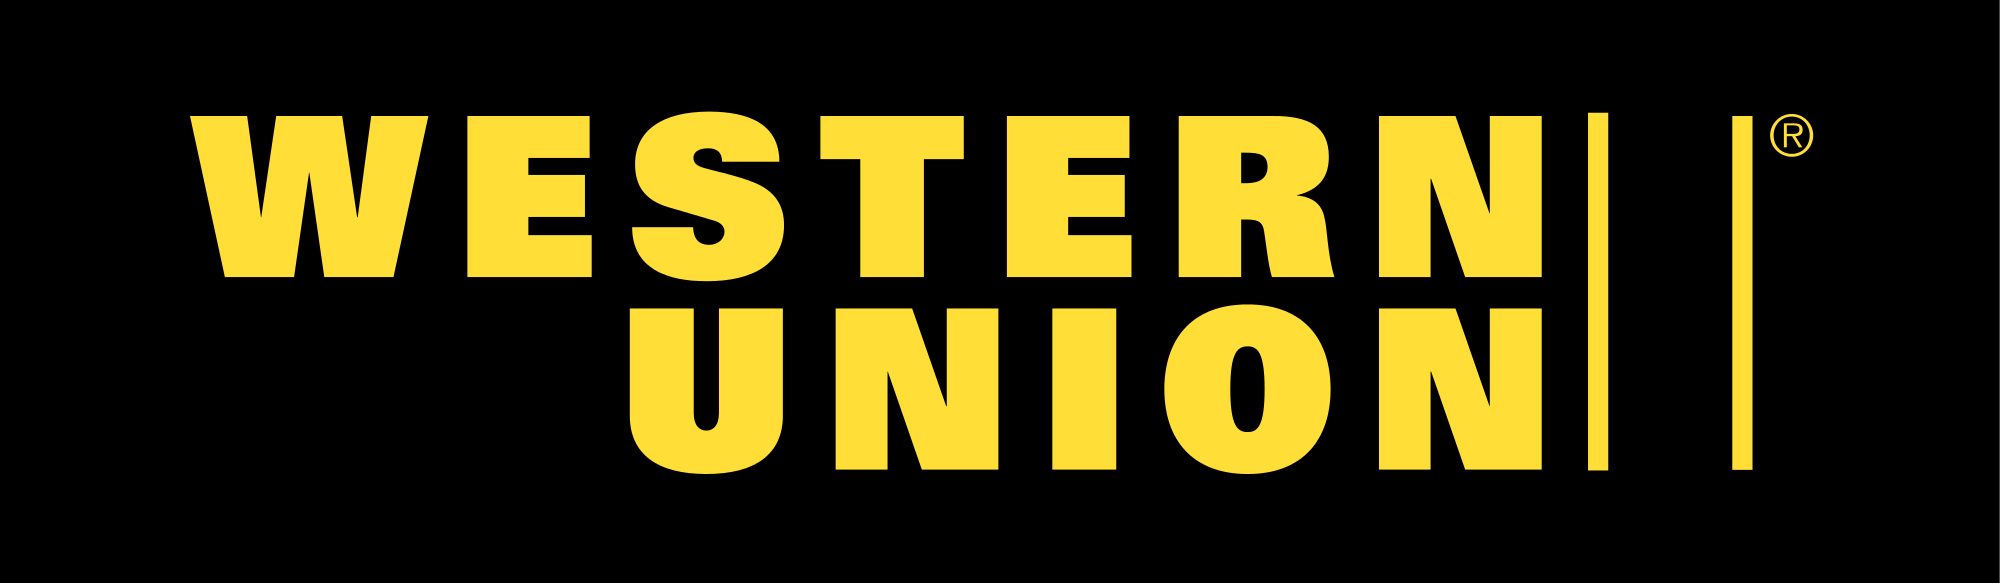 Get $250 From Western Union! 